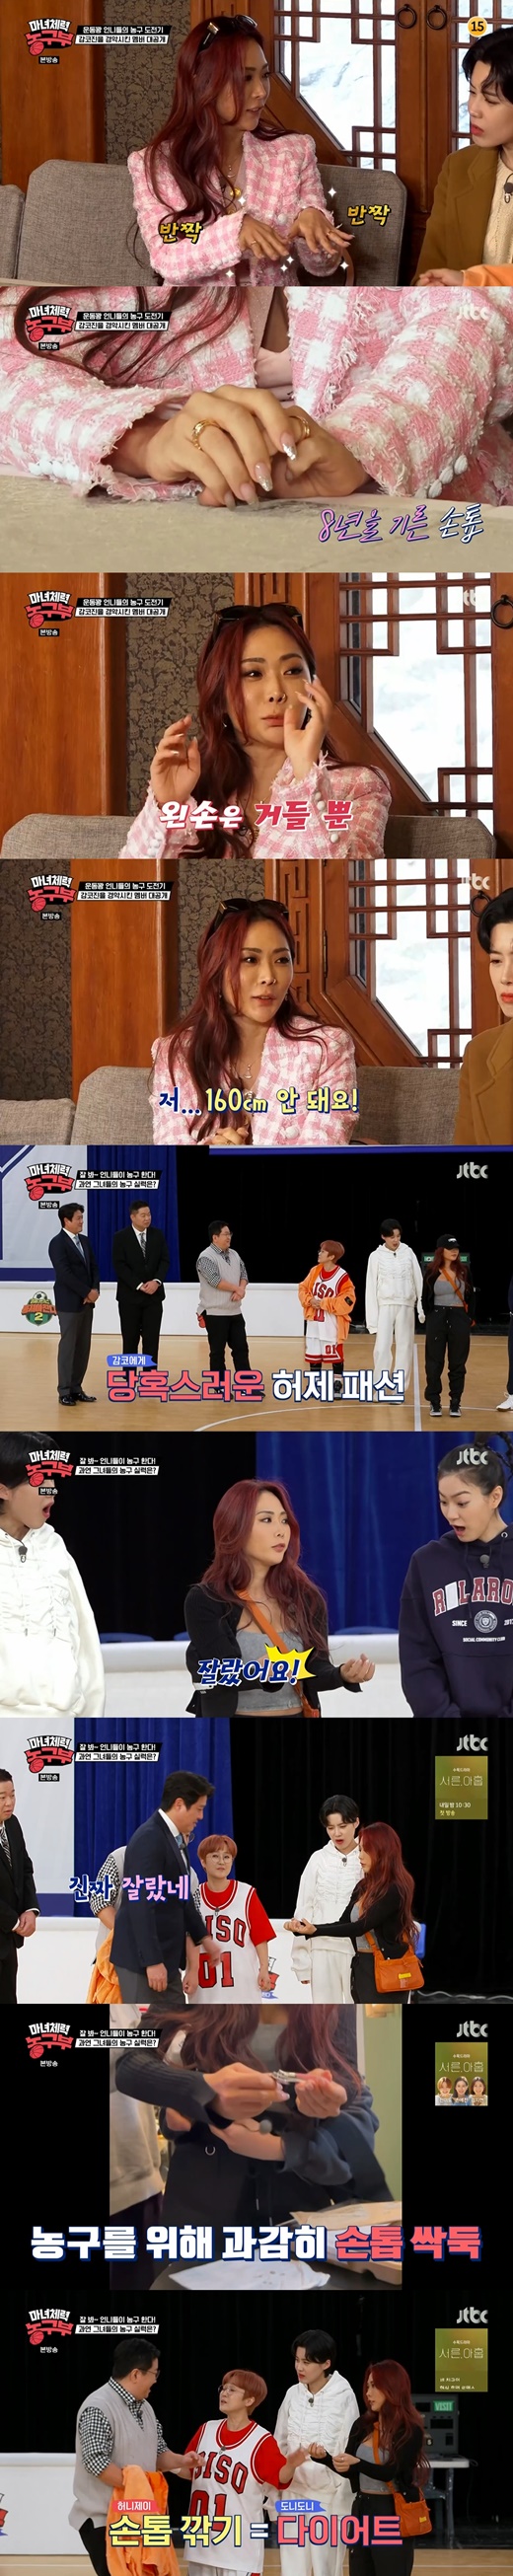 Dancer honey Jay plays basketball as top modelOn the afternoon of the 15th, JTBCs new entertainment program Sisters run - Witch Physical Fitness Basketball Department was first broadcast.Khochi Hyun Joo-yup, manager Jeong Hyeong-don, 8-player players Song Eun-yi, Ko Soo-hee, Star, Park Sun-young, Jang Doyeon, honey jay, Ok Ja-yeon and Lim Soo-hyang gathered the topic with the top model of sports for the sports of the sisters.I am very scared, said honey Jay, who said, I was worried about the risk of injury because I was a dancer, and I have American College of Allergy, Asthma and Immun.In fact, I was worried a lot about it; theres always (respiratory) in the bag, he said.I was 27 years old and had a late American College of Allergy (Asthma and Immun) and I have never been in a violent movement other than dancing since.I do not know what it will be like. At this time, Jeong Hyeong-don attracted attention by asking the honey jay to show his hand; the nails of the honey jay were colorful and long with nail art.Mun Kyung-eun sighed, What do you do? I will break my nails.I decided to cut it boldly for the program, this is all my nails, this was the length for eight years, so you have to be responsible, said Honey Jay.The kidney is less than 160cm, he said cautiously. The height of the honey jay is 159cm.Jang Doyeon and Song Eun-yi sided with good ratio, but Jeong Hyeong-don laughed, saying, Its not a basketball ratio.The shotform demonstration by honey jay also produced expectations: I know that.When the left hand was only a help, Moon said, It is a little better. Meanwhile, honey jay caught the eye with a hip fashion on the basketball court.Ive never seen a hat on a basketball court before, said Hyun Joo-yup Kochi, slightly embarrassed, but honey Jay said, The hat is my persona.When I said that I could run with my bag, I ran Polp and informed me that there was no problem.Above all, the recent nails of honey jay, which caused curiosity, were also revealed.Its all cut, the honey Jay showed me his hand, and Jang Doyeon surprised everyone, saying, Its really cut up.So Song Eun-yi said, Honey jay cuts nails, like Jeong Hyeong-don loses weight.